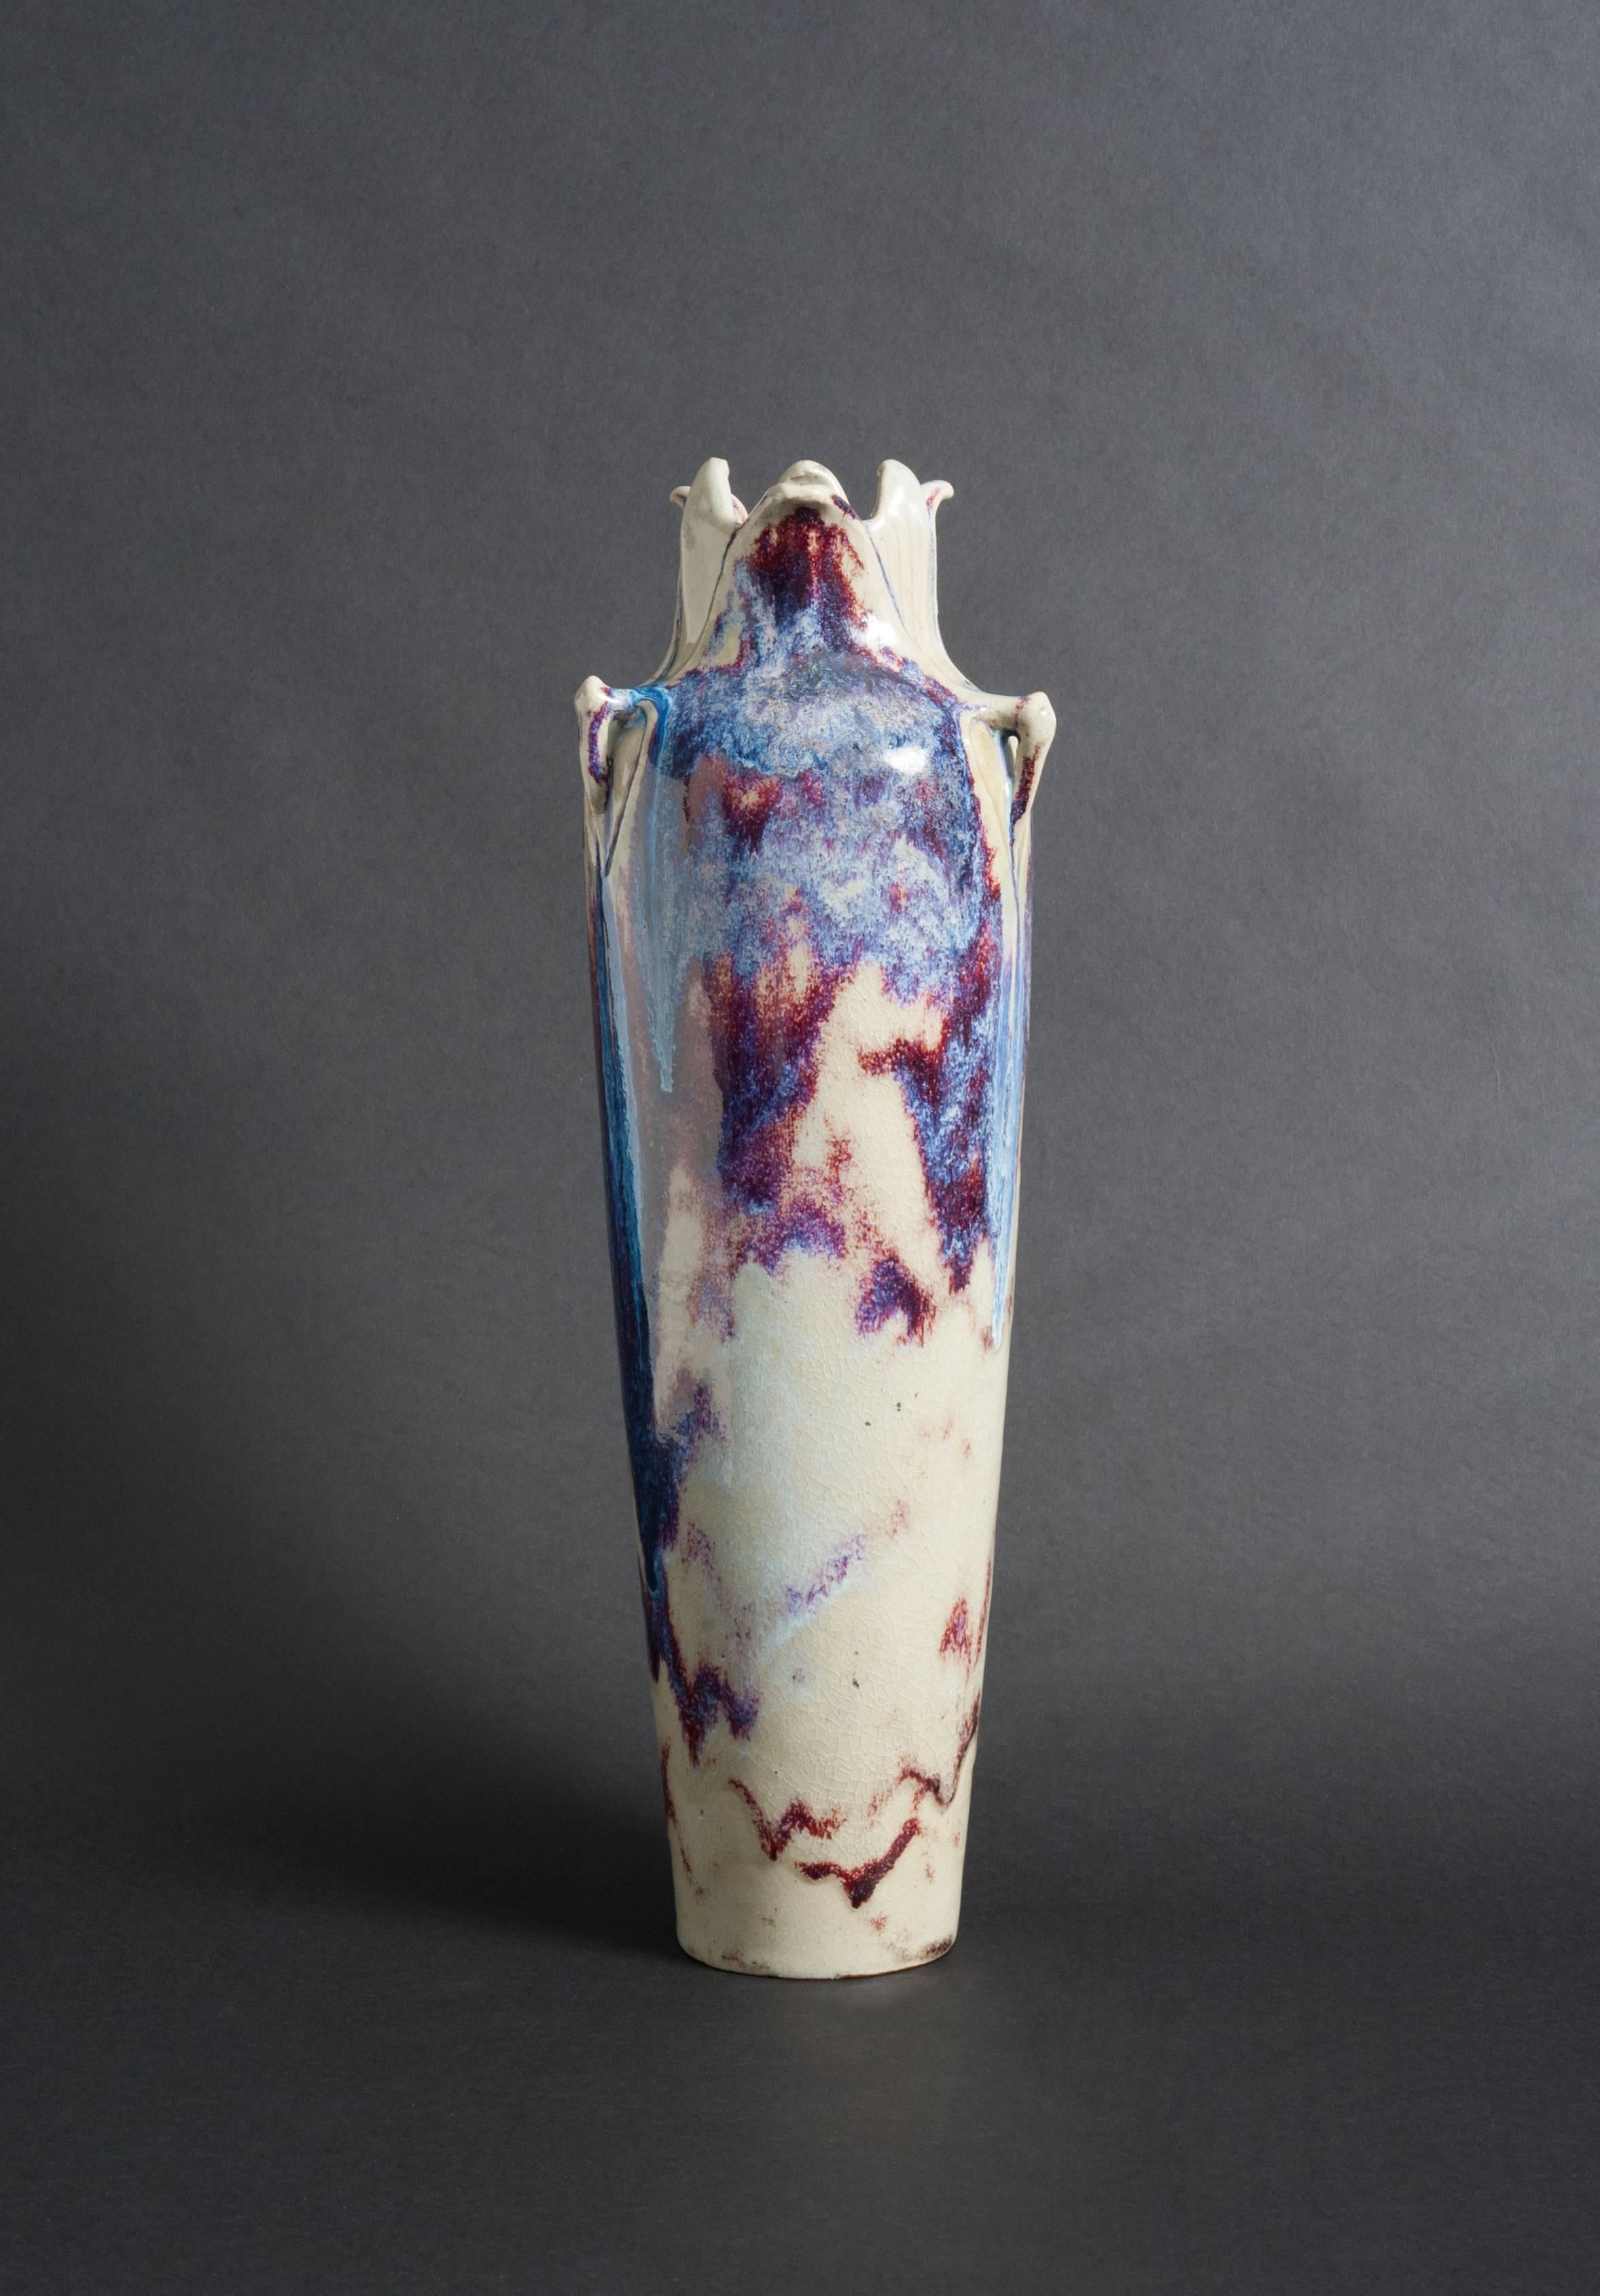 Lachenal’s vase explores the gorgeous abstract effects of process itself every bit as dramatically as it captures a moment in time. It is a cascade of color held in perfect tension. As one of the pivotal figures of the Art Nouveau, Edmond Lachenal